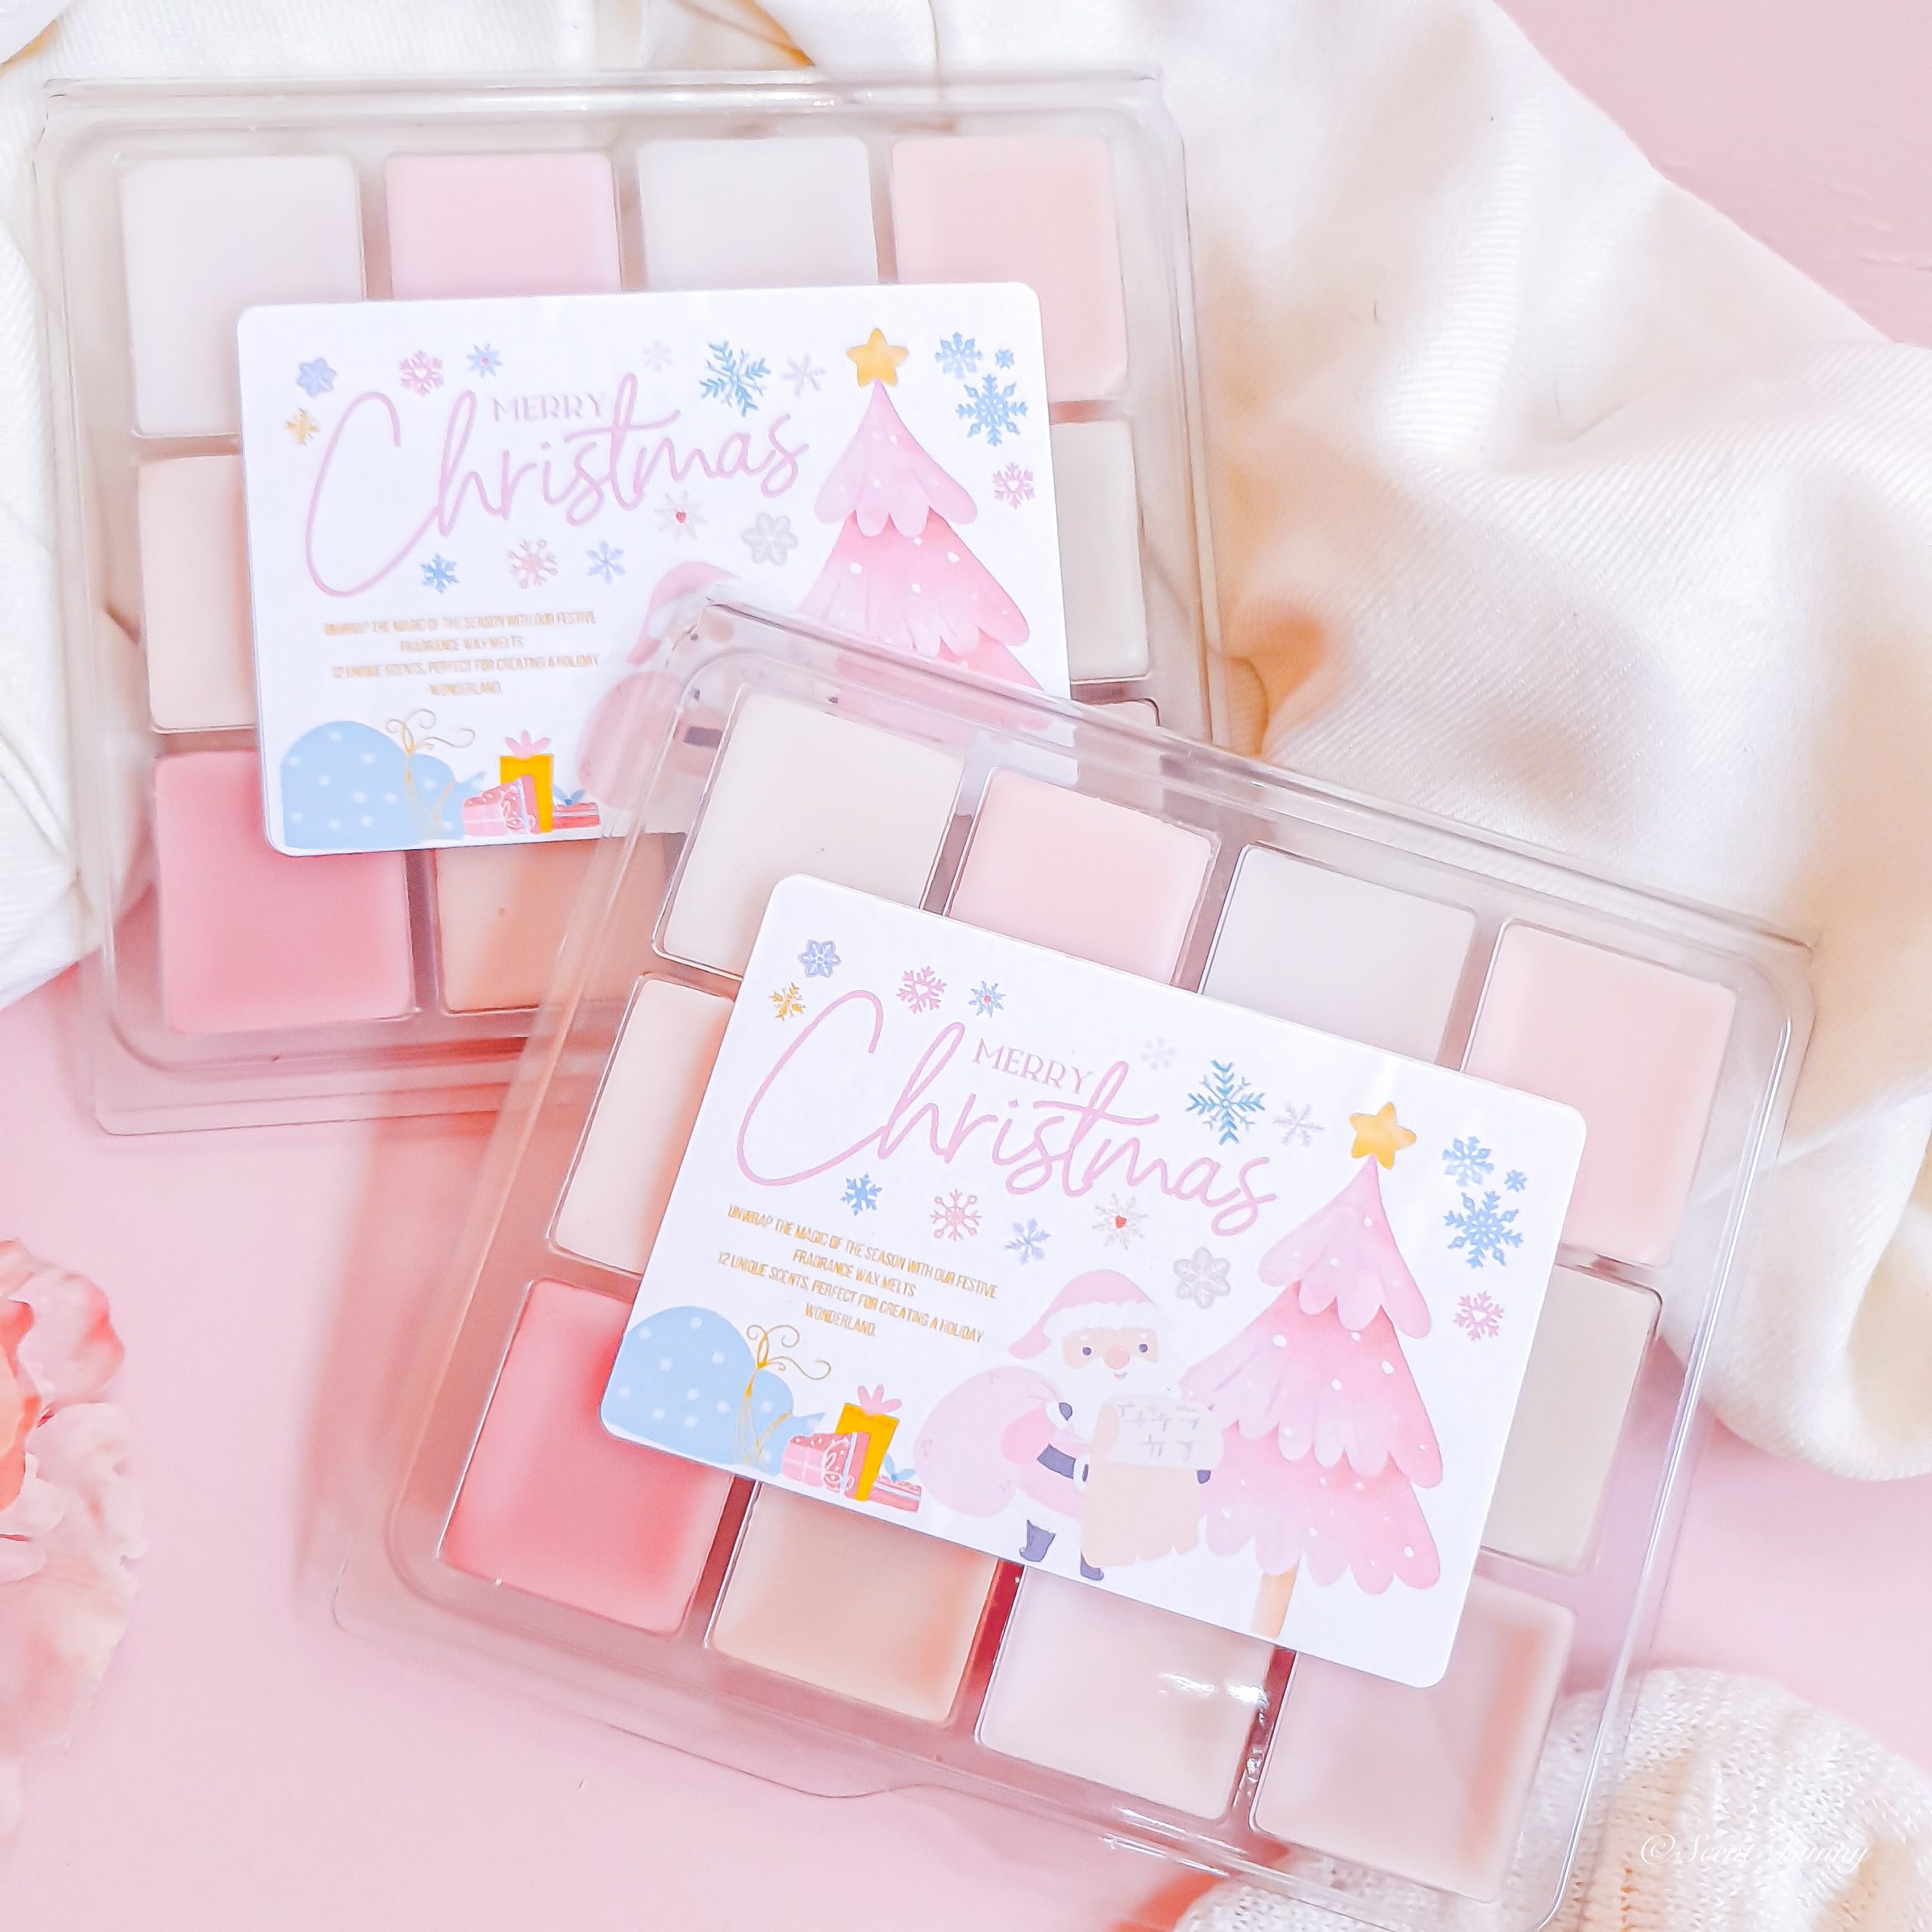 Scent Bunny's Christmas Wax Melt Collection: Festive Scents for a Cozy Holiday